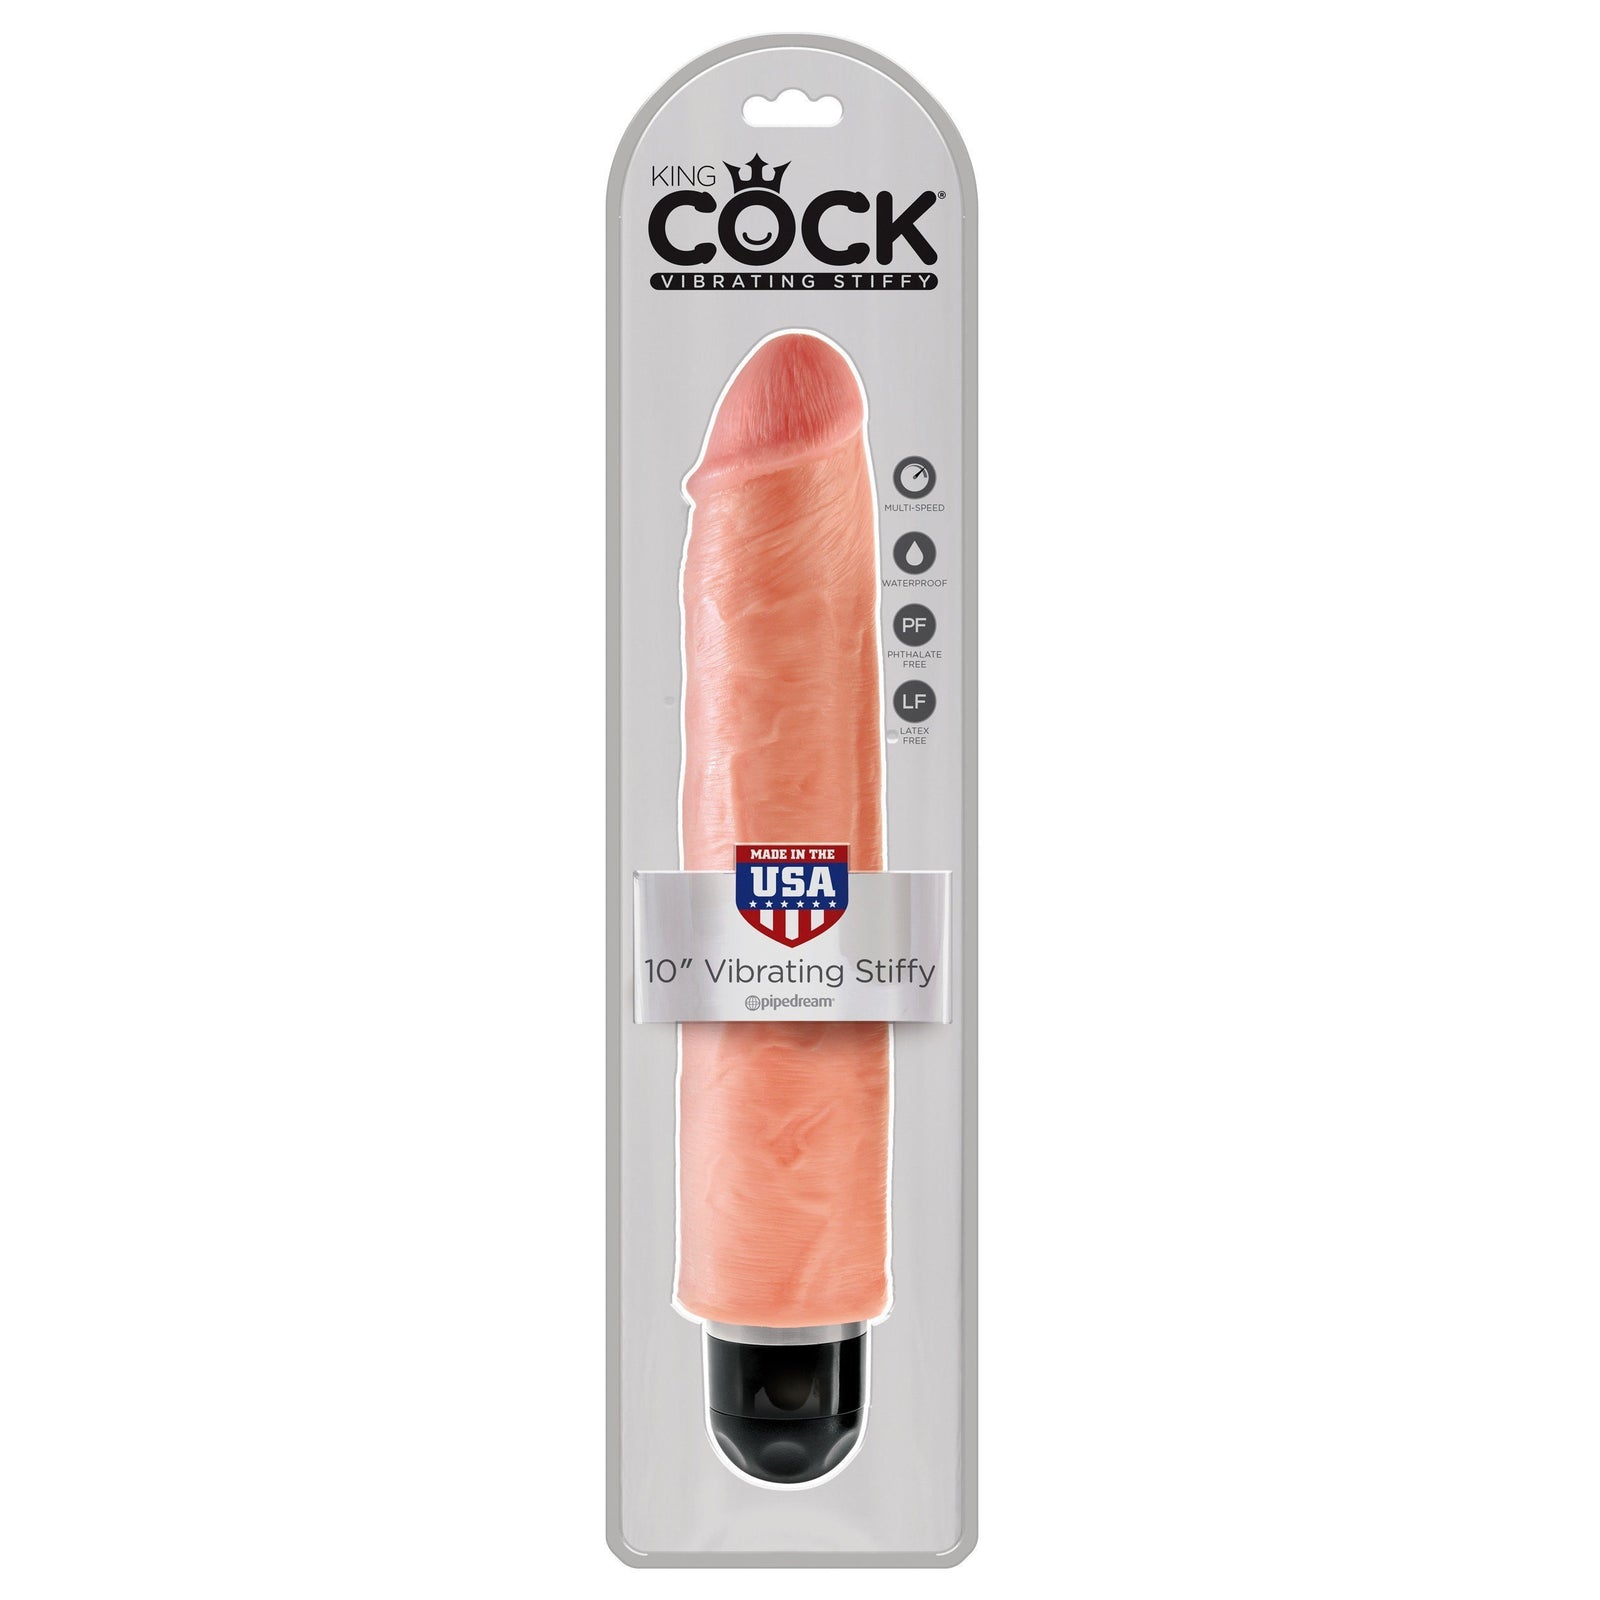 Pipedream - King Cock 10" Vibrating Stiffy Cock (Beige) Non Realistic Dildo w/o suction cup (Vibration) Non Rechargeable - CherryAffairs Singapore